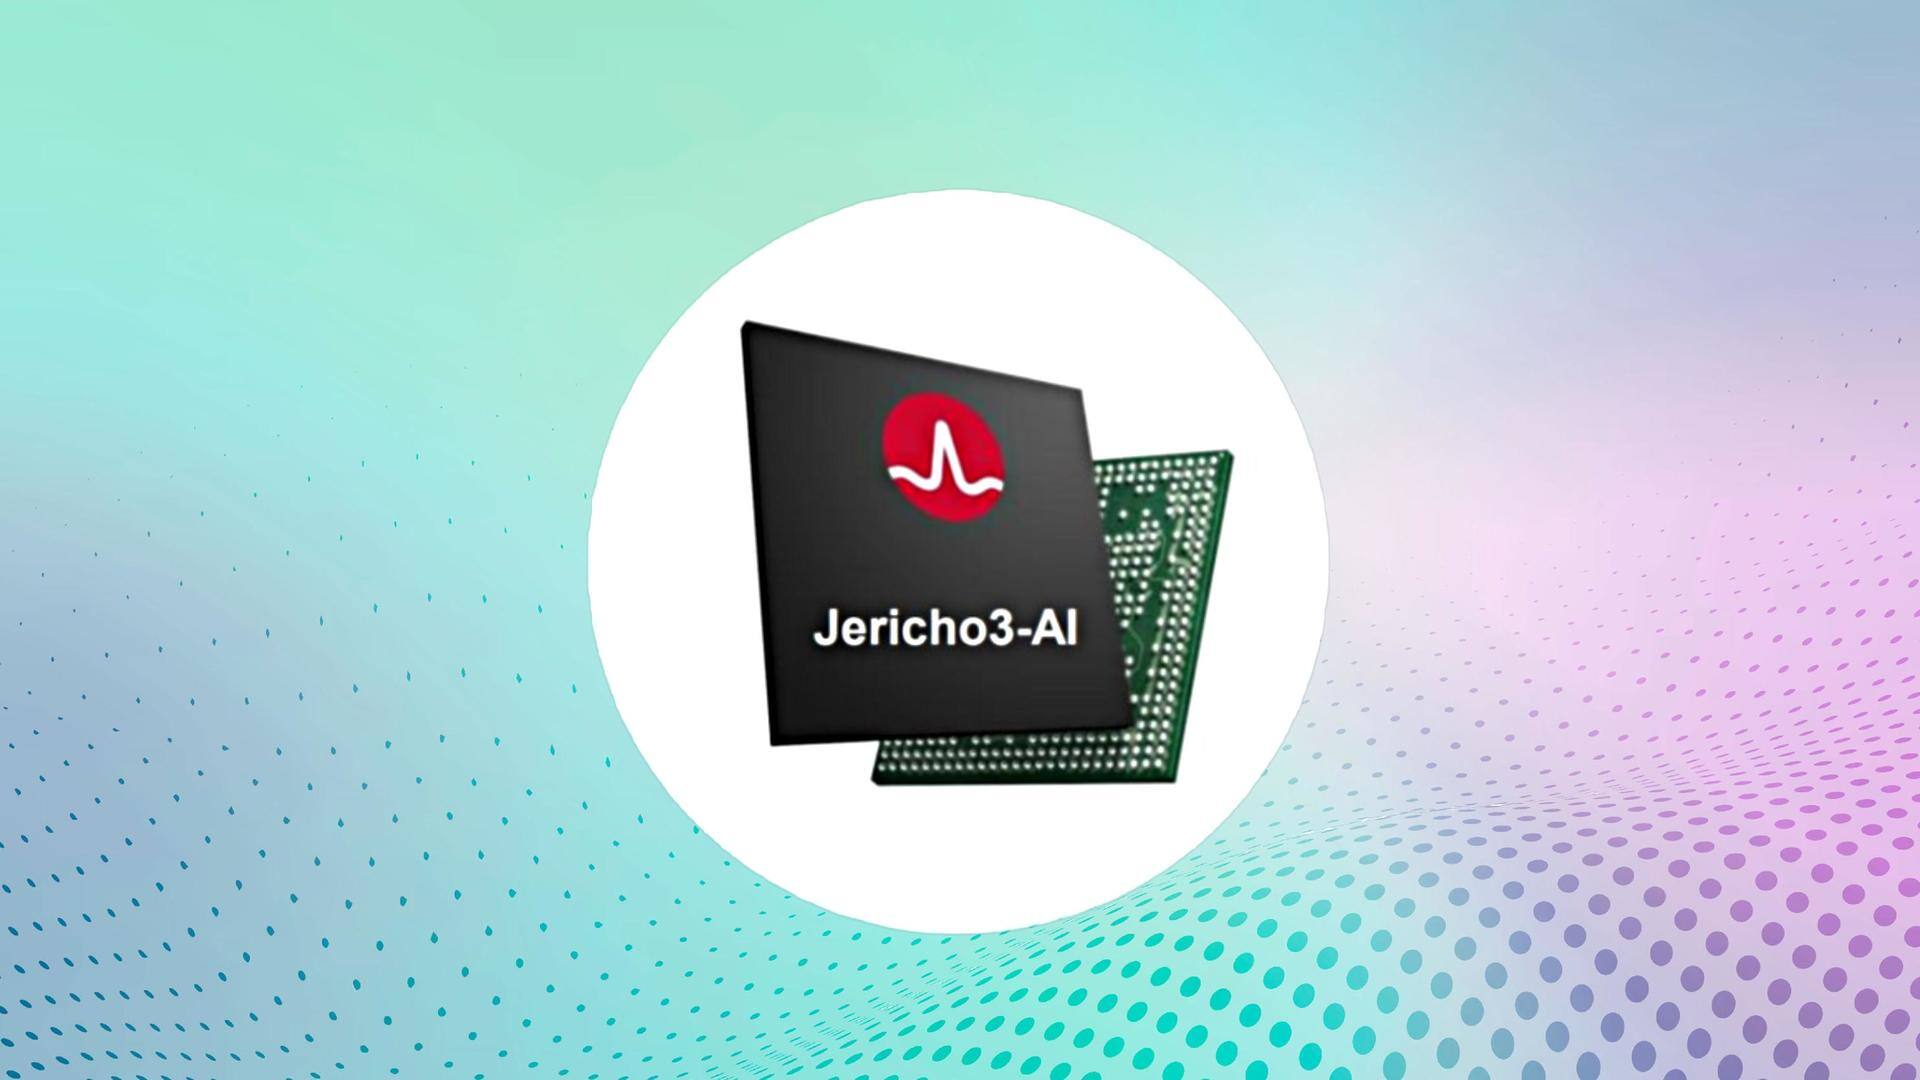 Broadcom launches Jericho3-AI chip for linking supercomputers: How it works